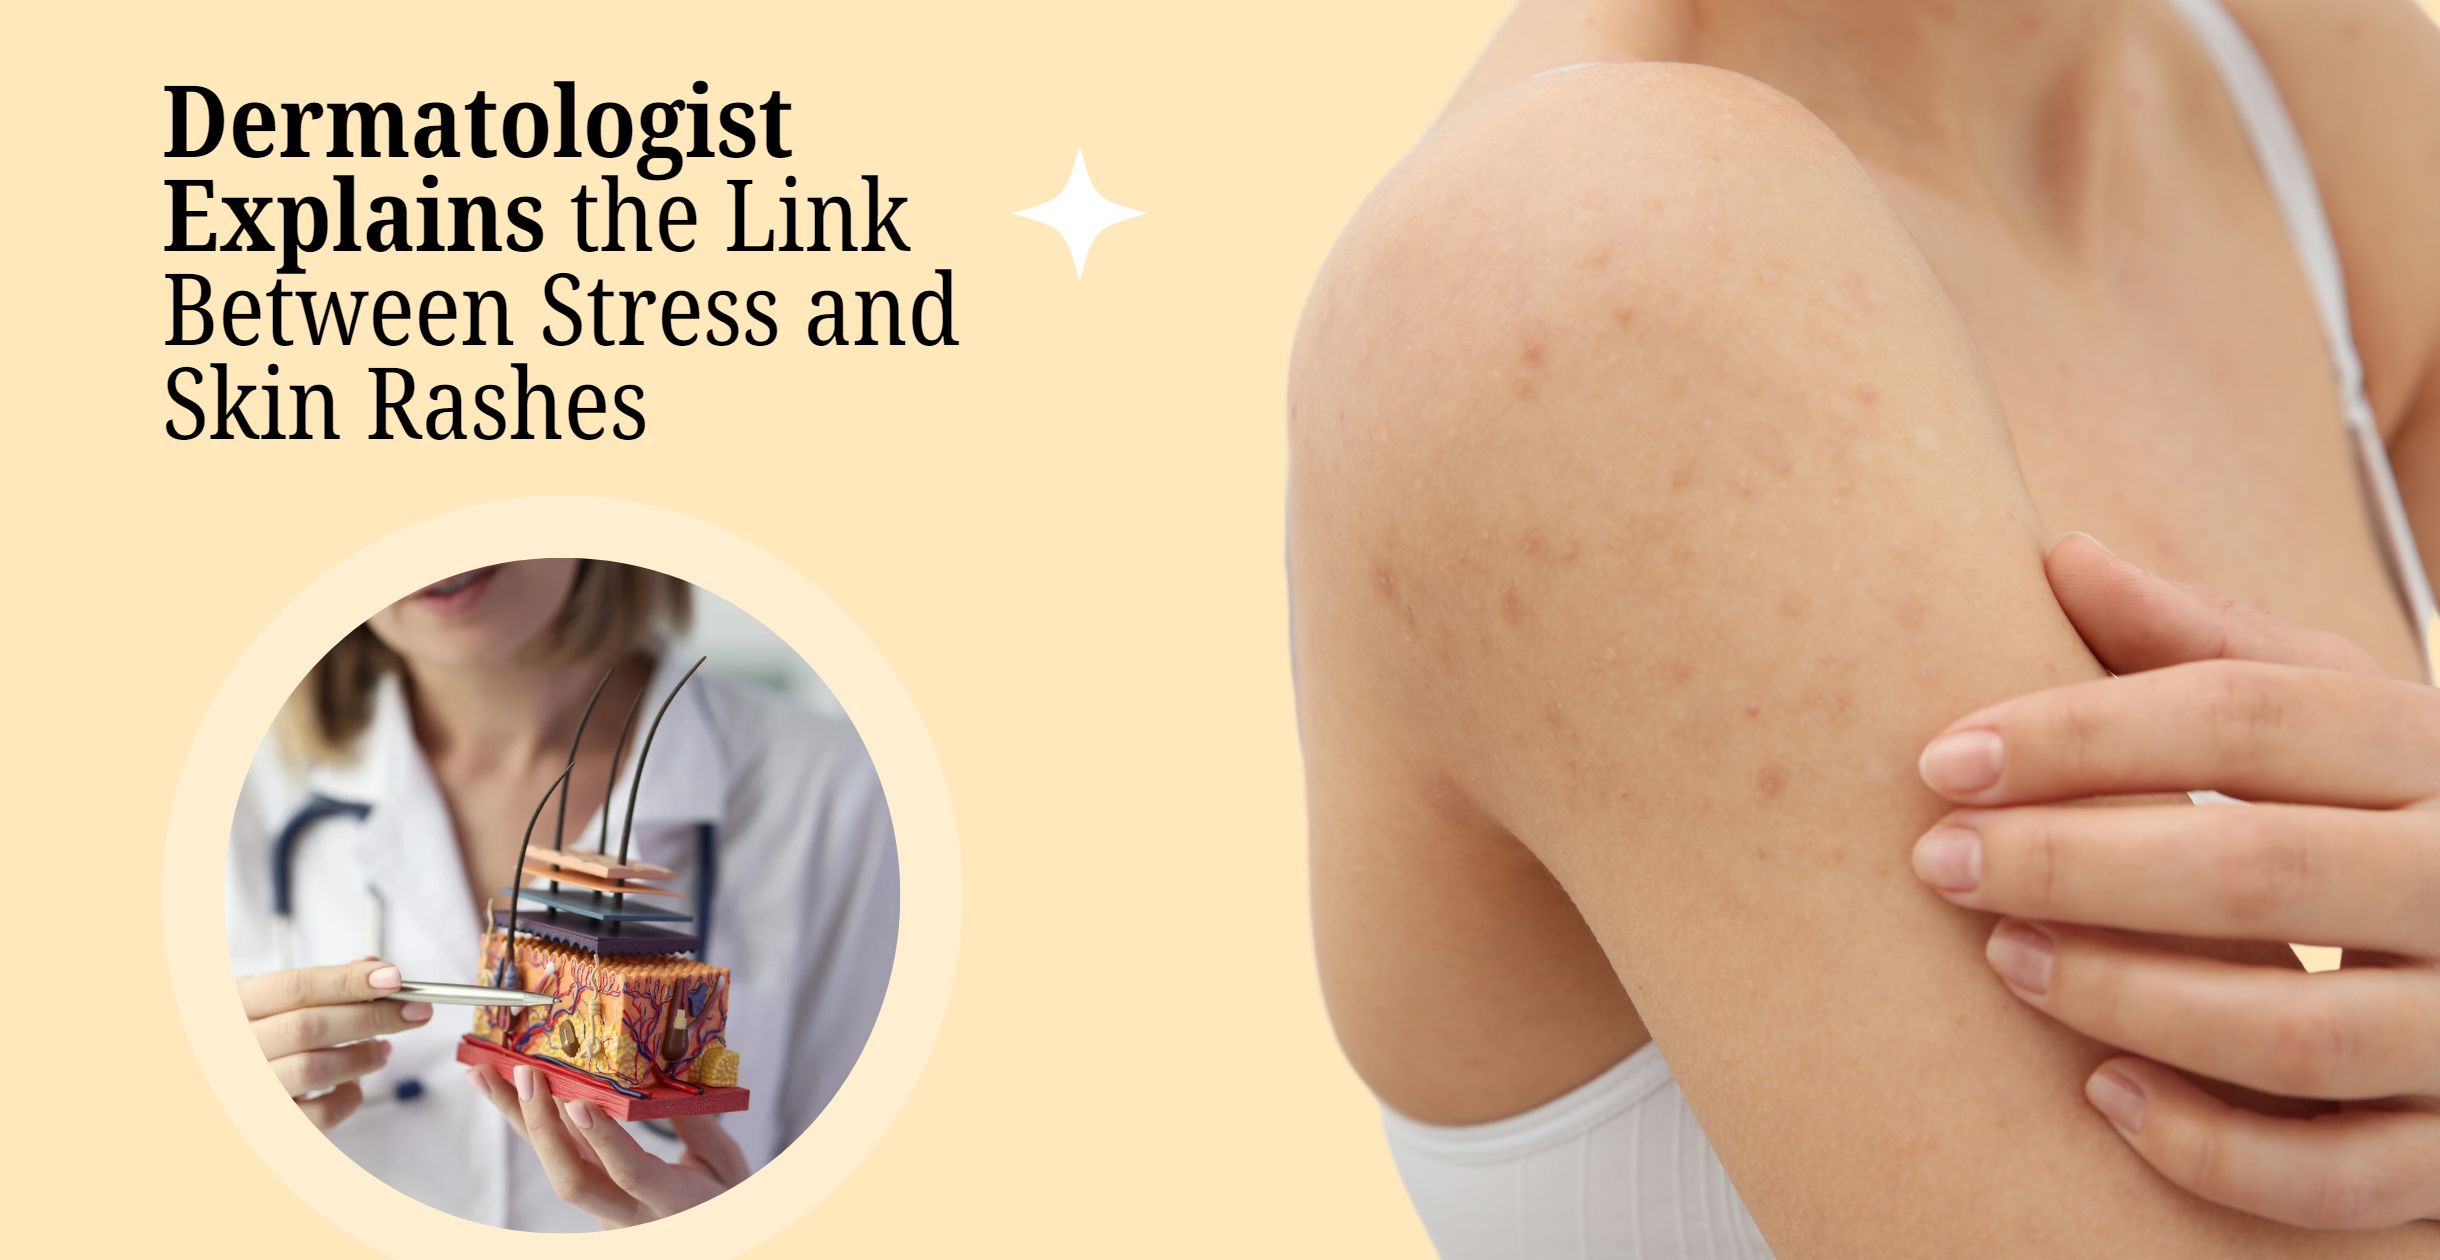 Dermatologist Explains the Link Between Stress and Skin Rashes